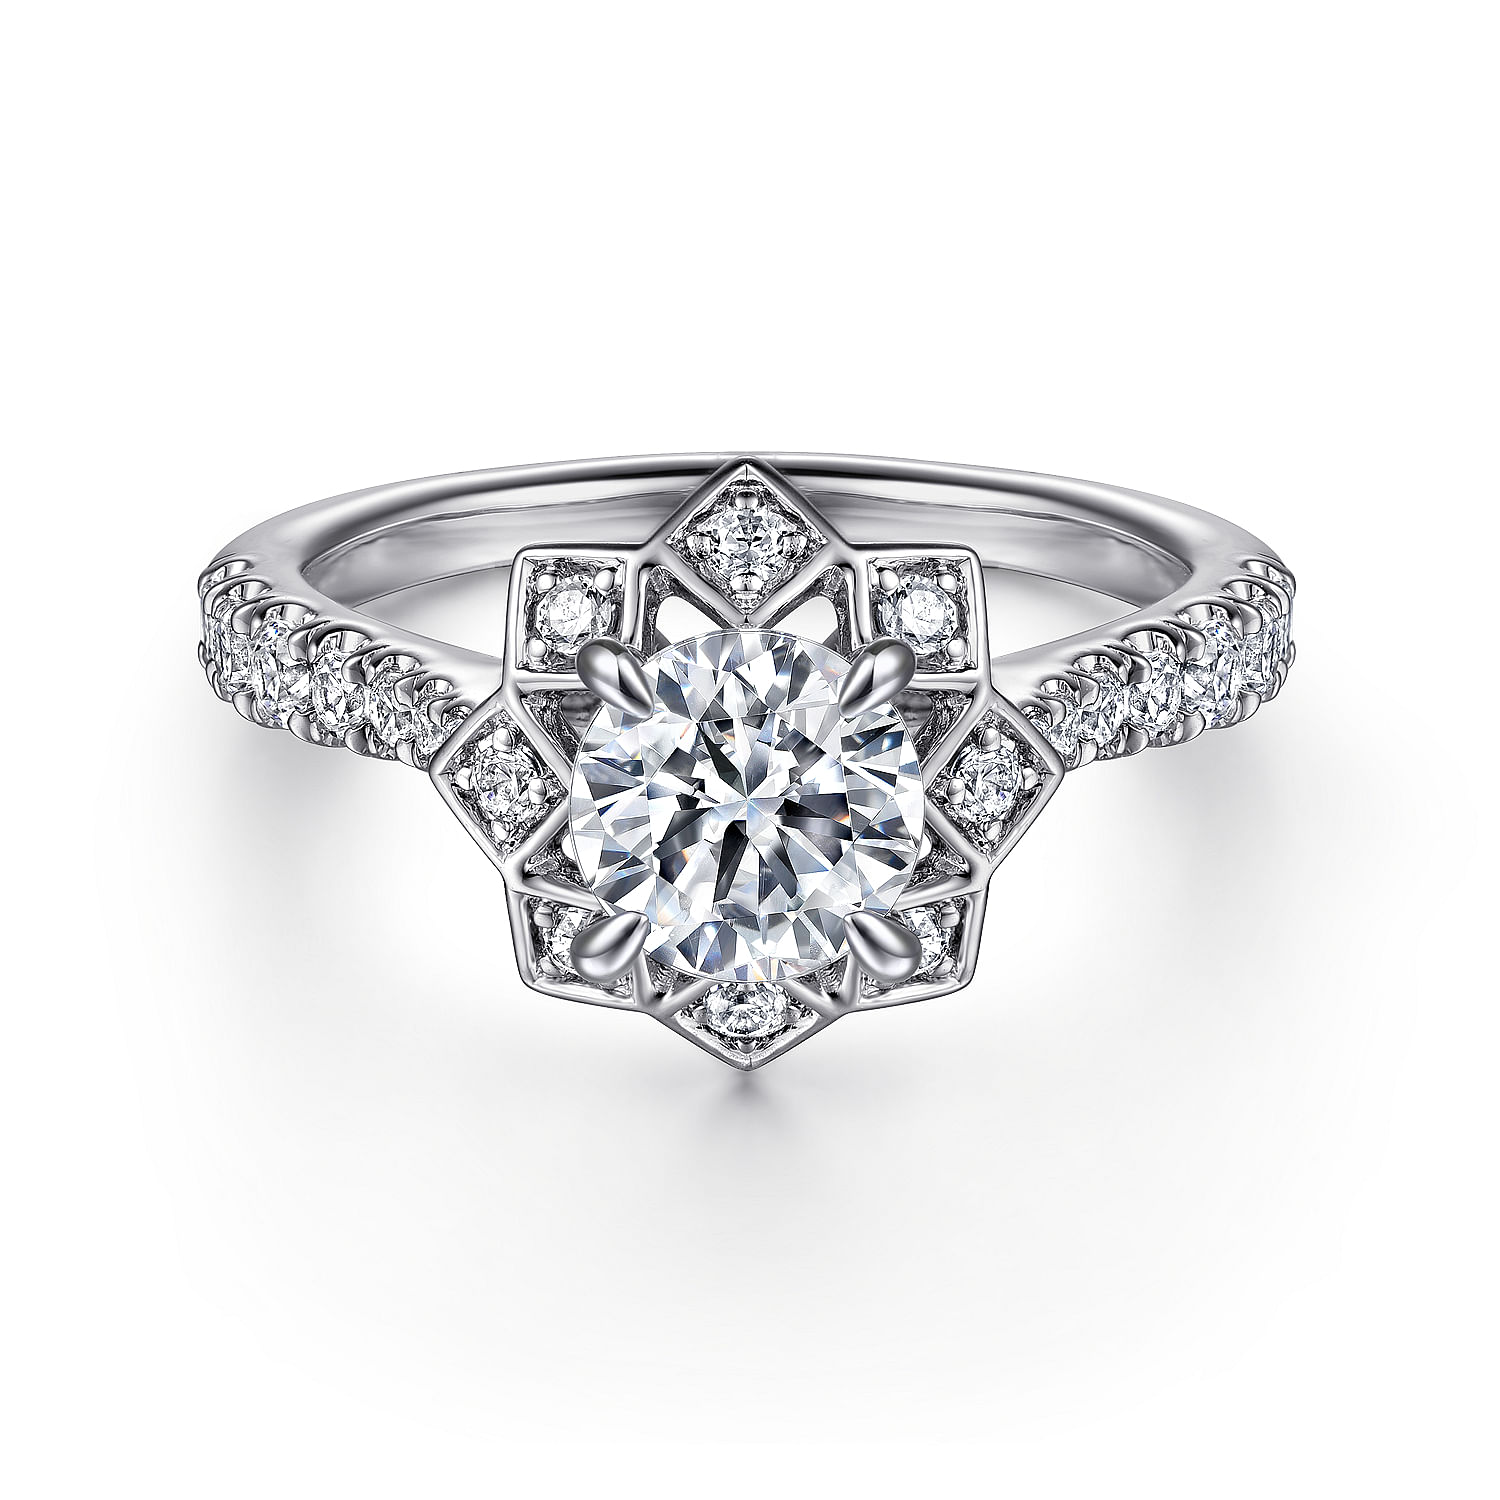 Gabriel - Art Deco Inspired 14K White Gold Floral Halo Round Diamond Engagement Ring